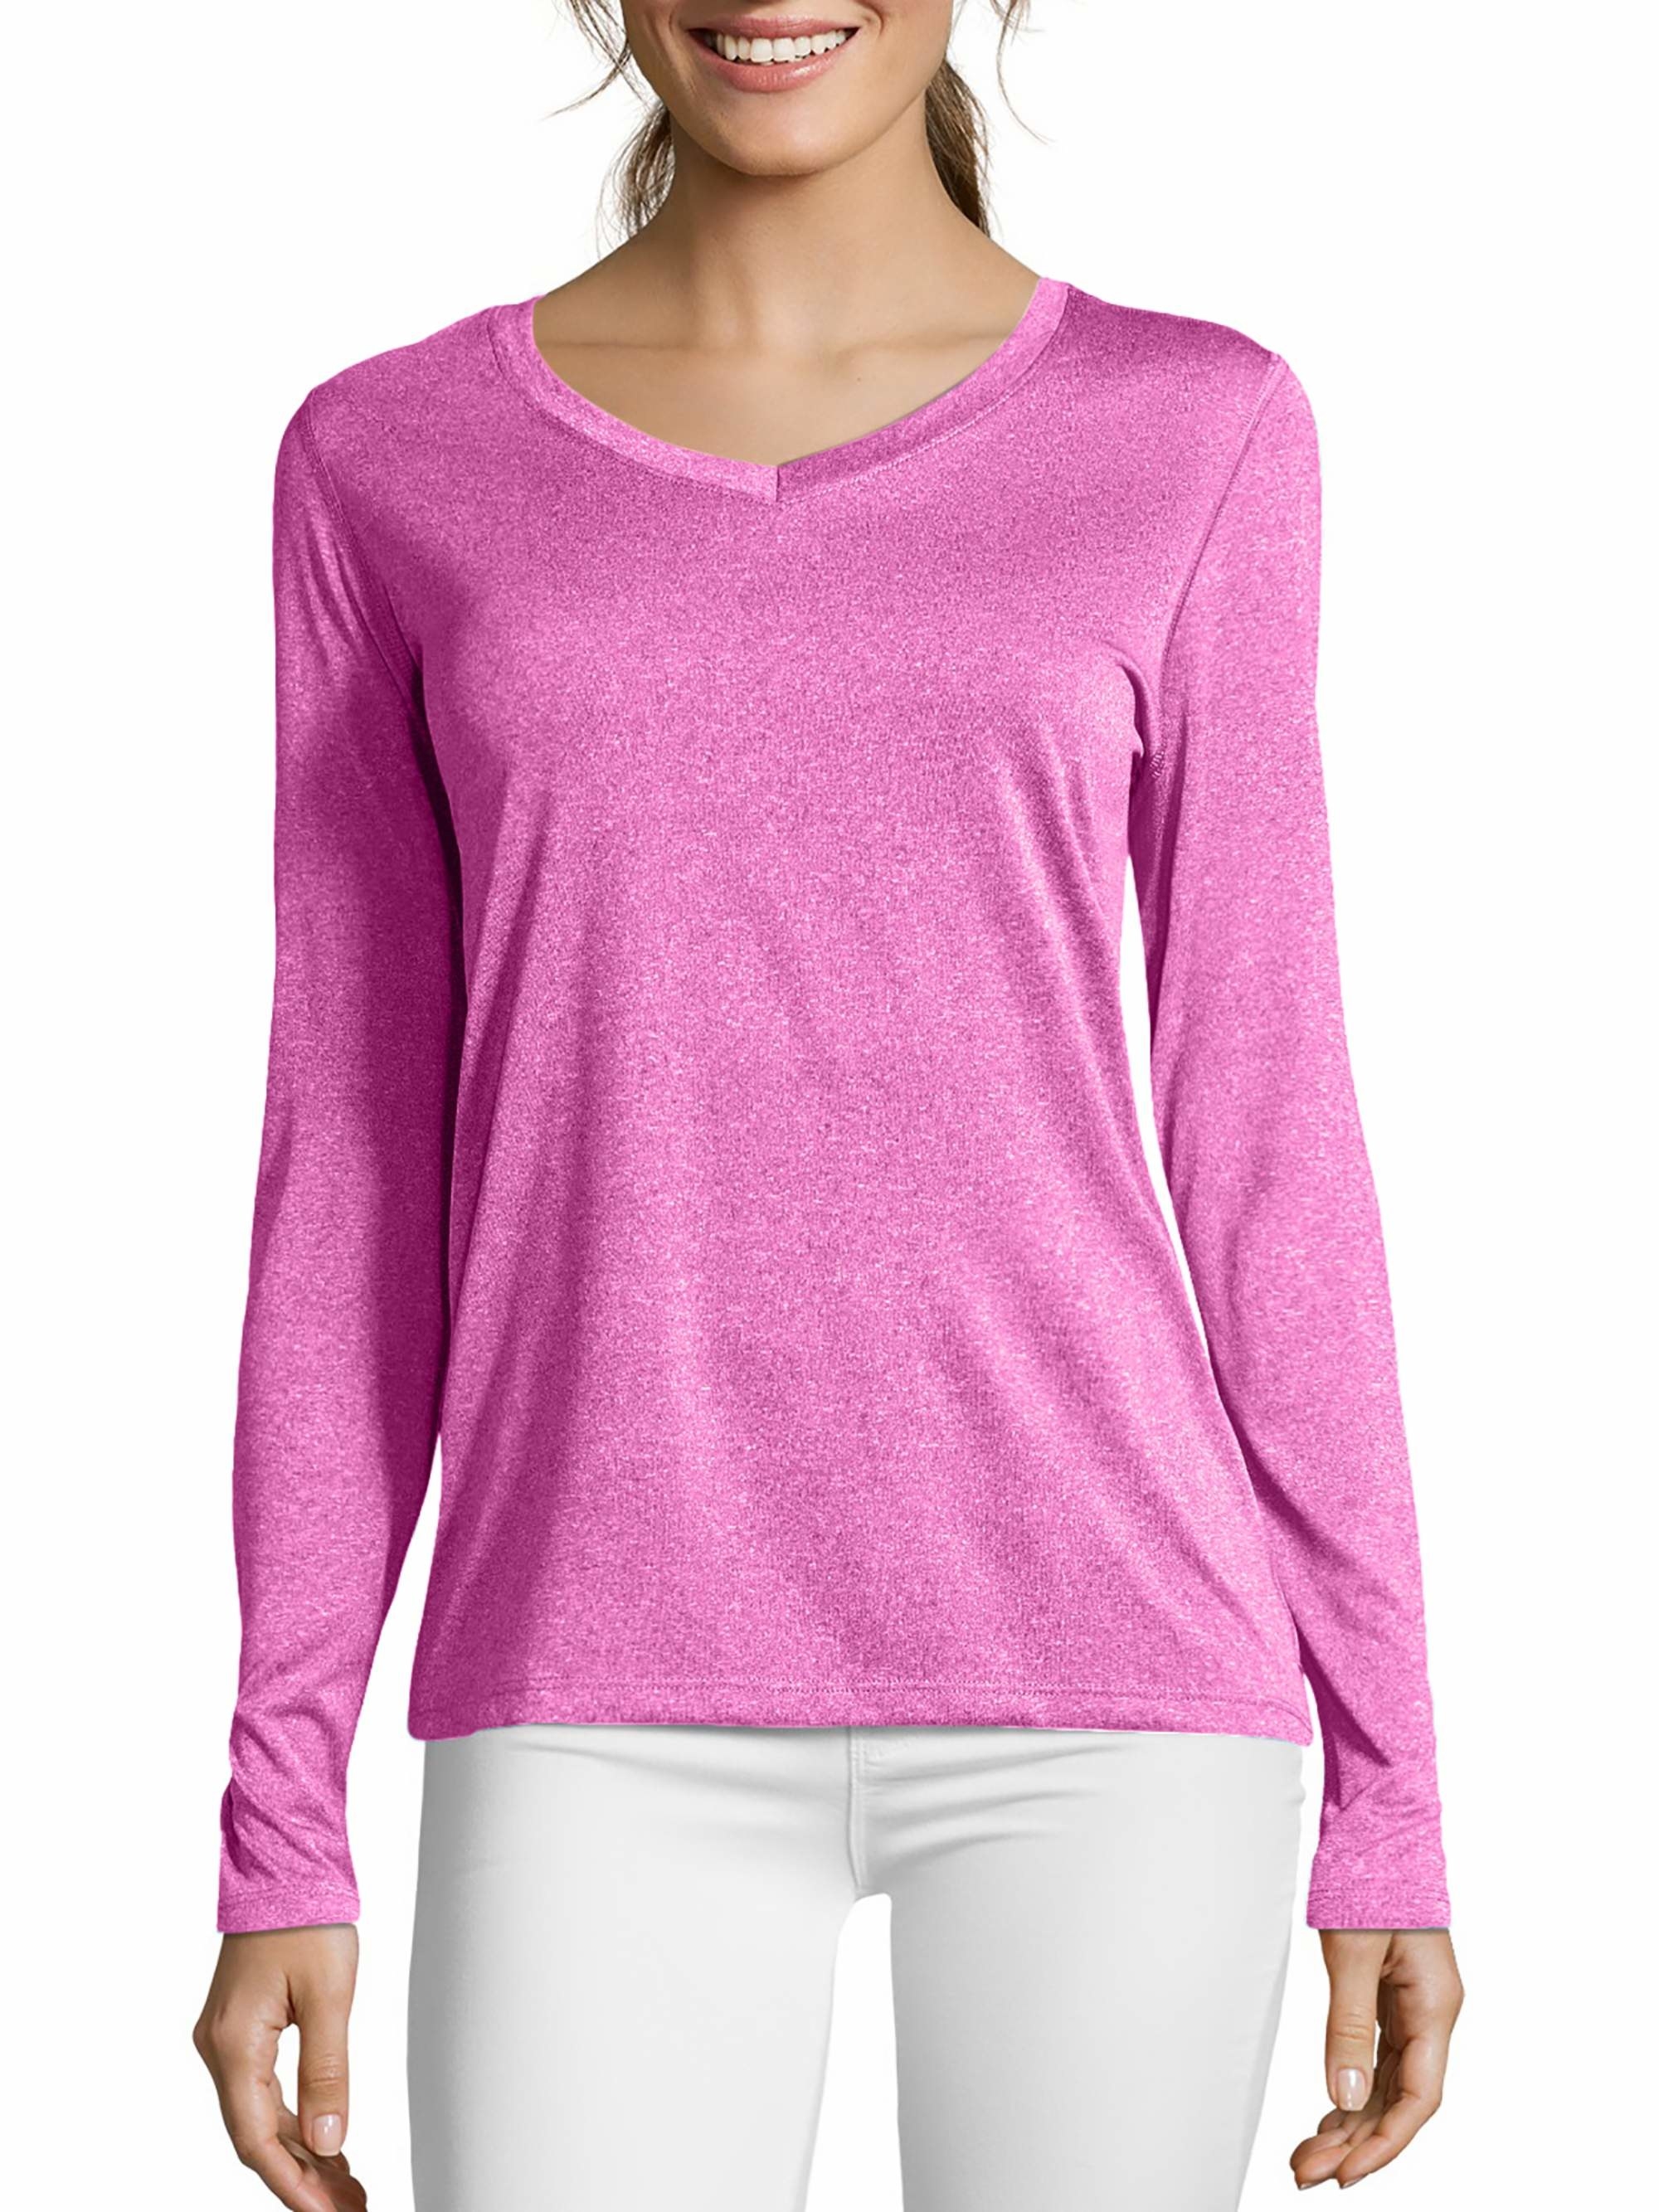 The pink long-sleeve T-shirt